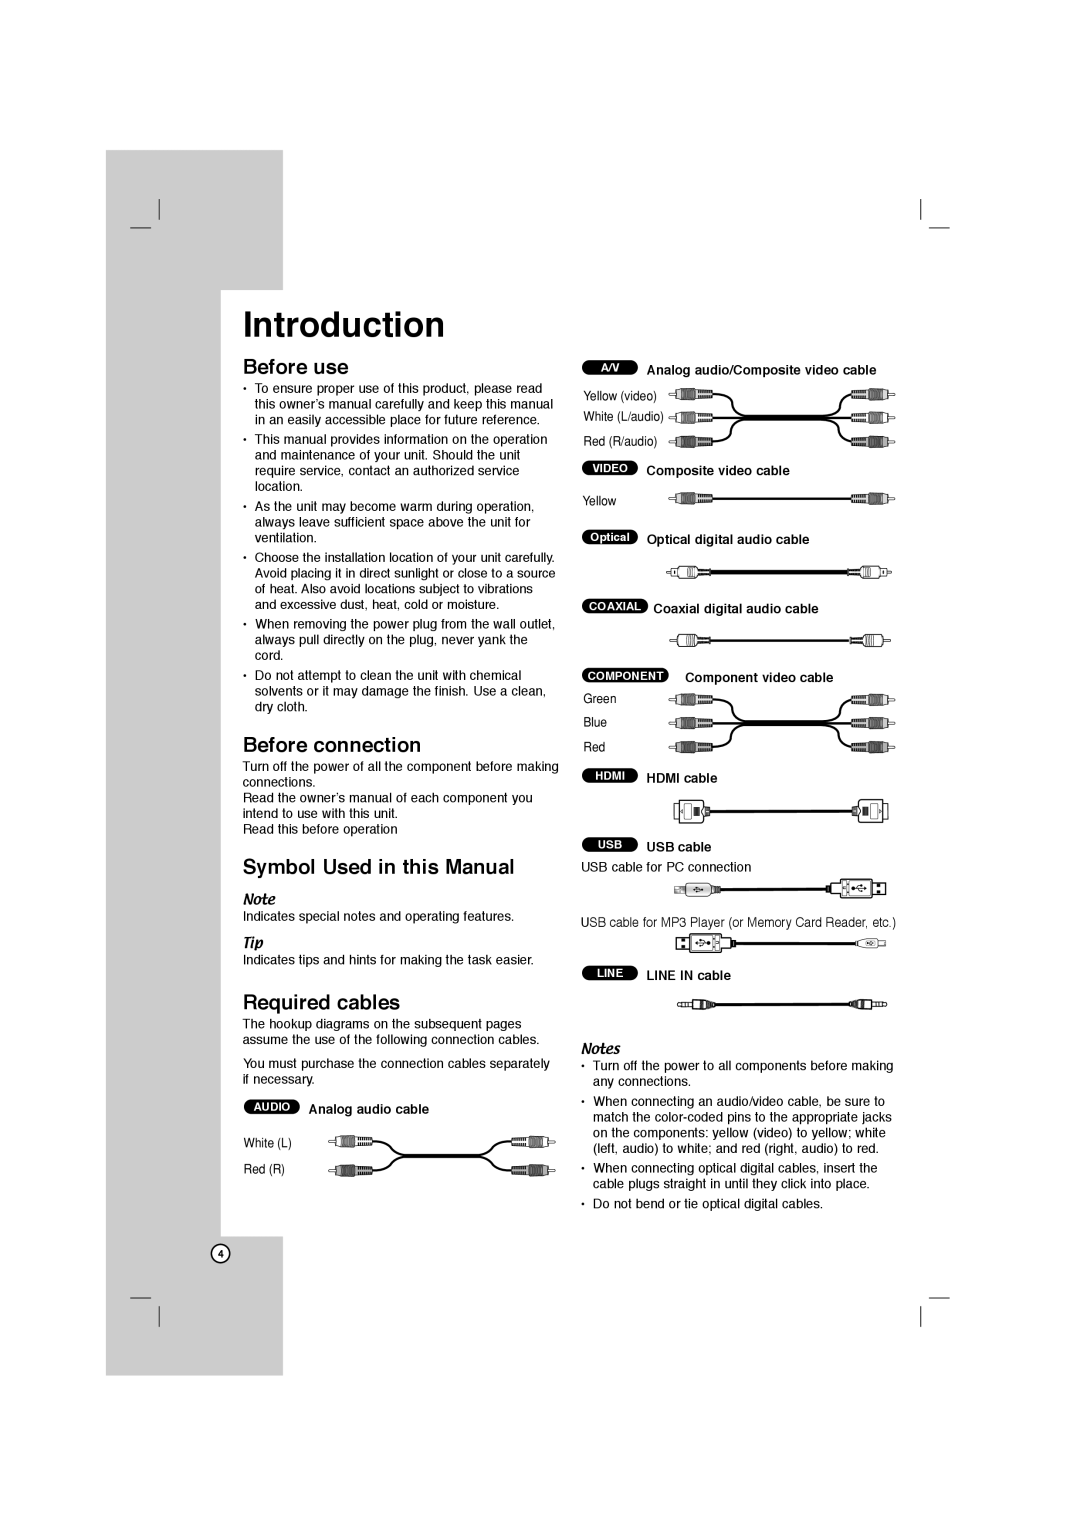 LG Electronics AR702BR Introduction, Before use, Before connection, Symbol Used in this Manual, Required cables, USB cable 